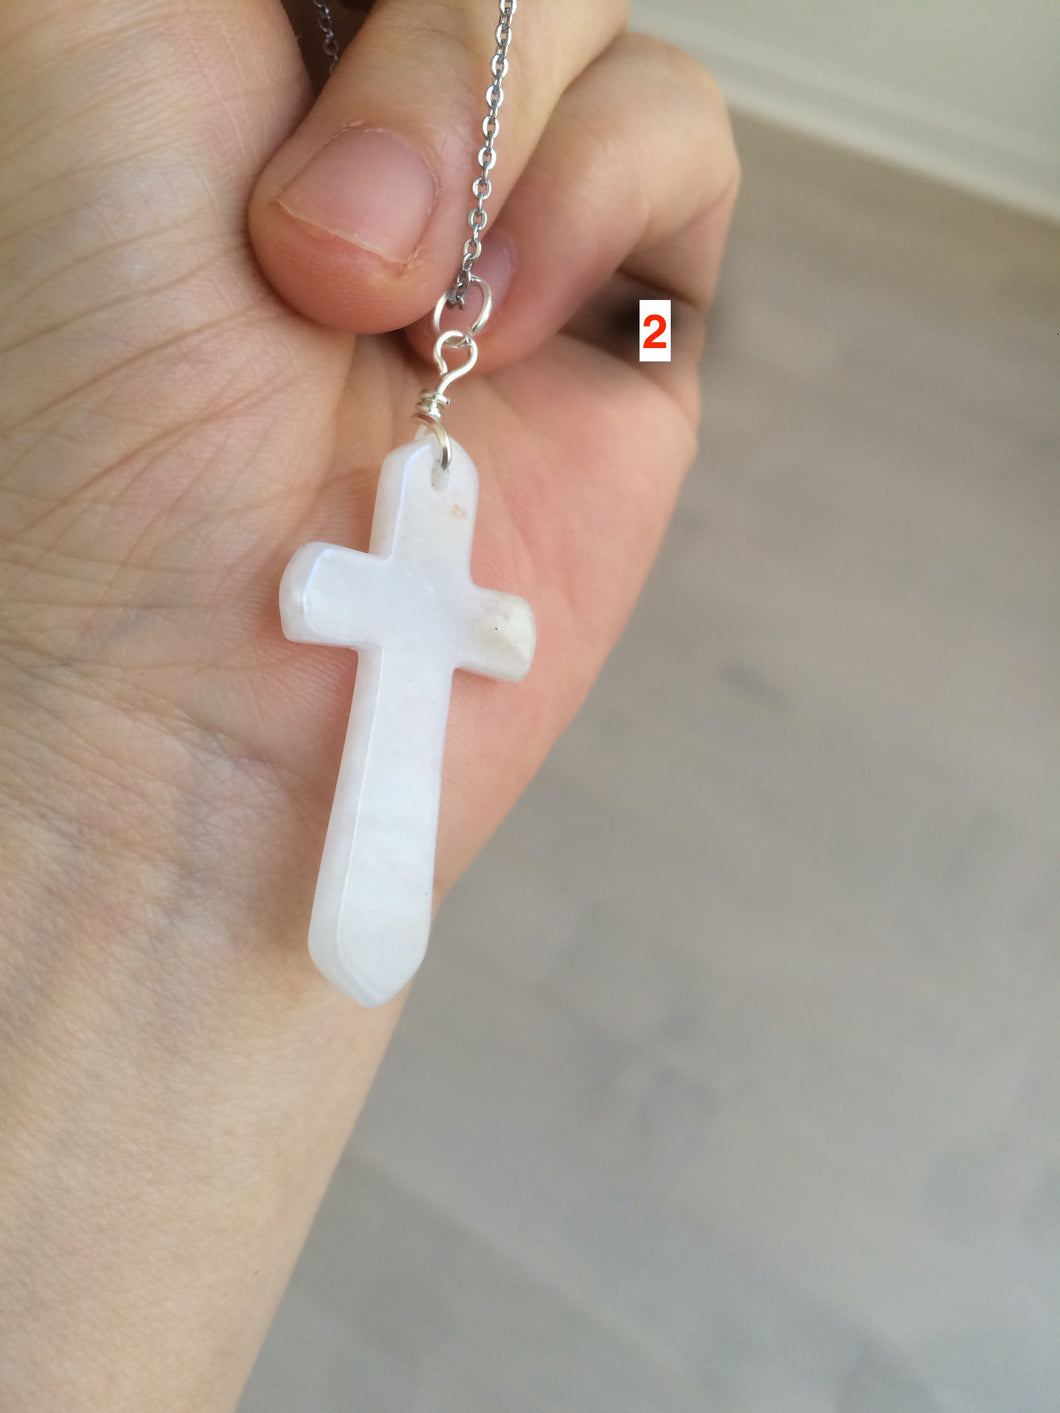 100% Natural type A yellow/white jadeite Jade cross pendant necklace AQ24